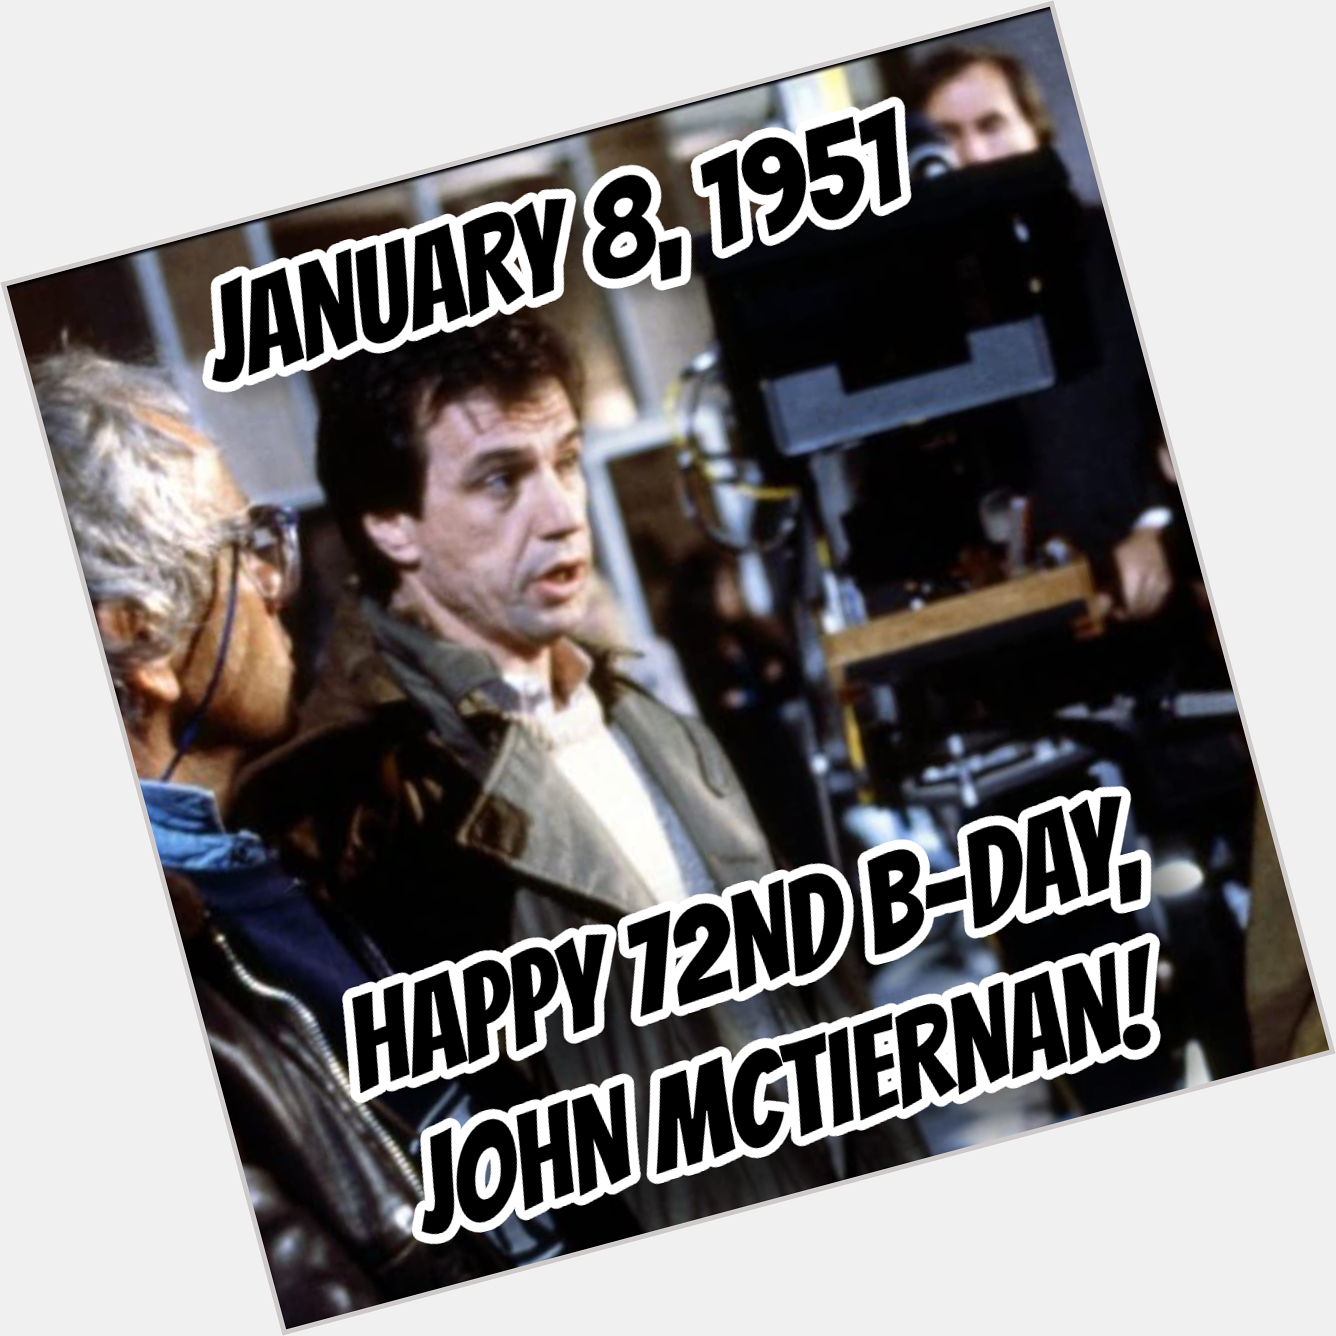 Happy 72nd John McTiernan!

What\s YOUR  movie??!! 